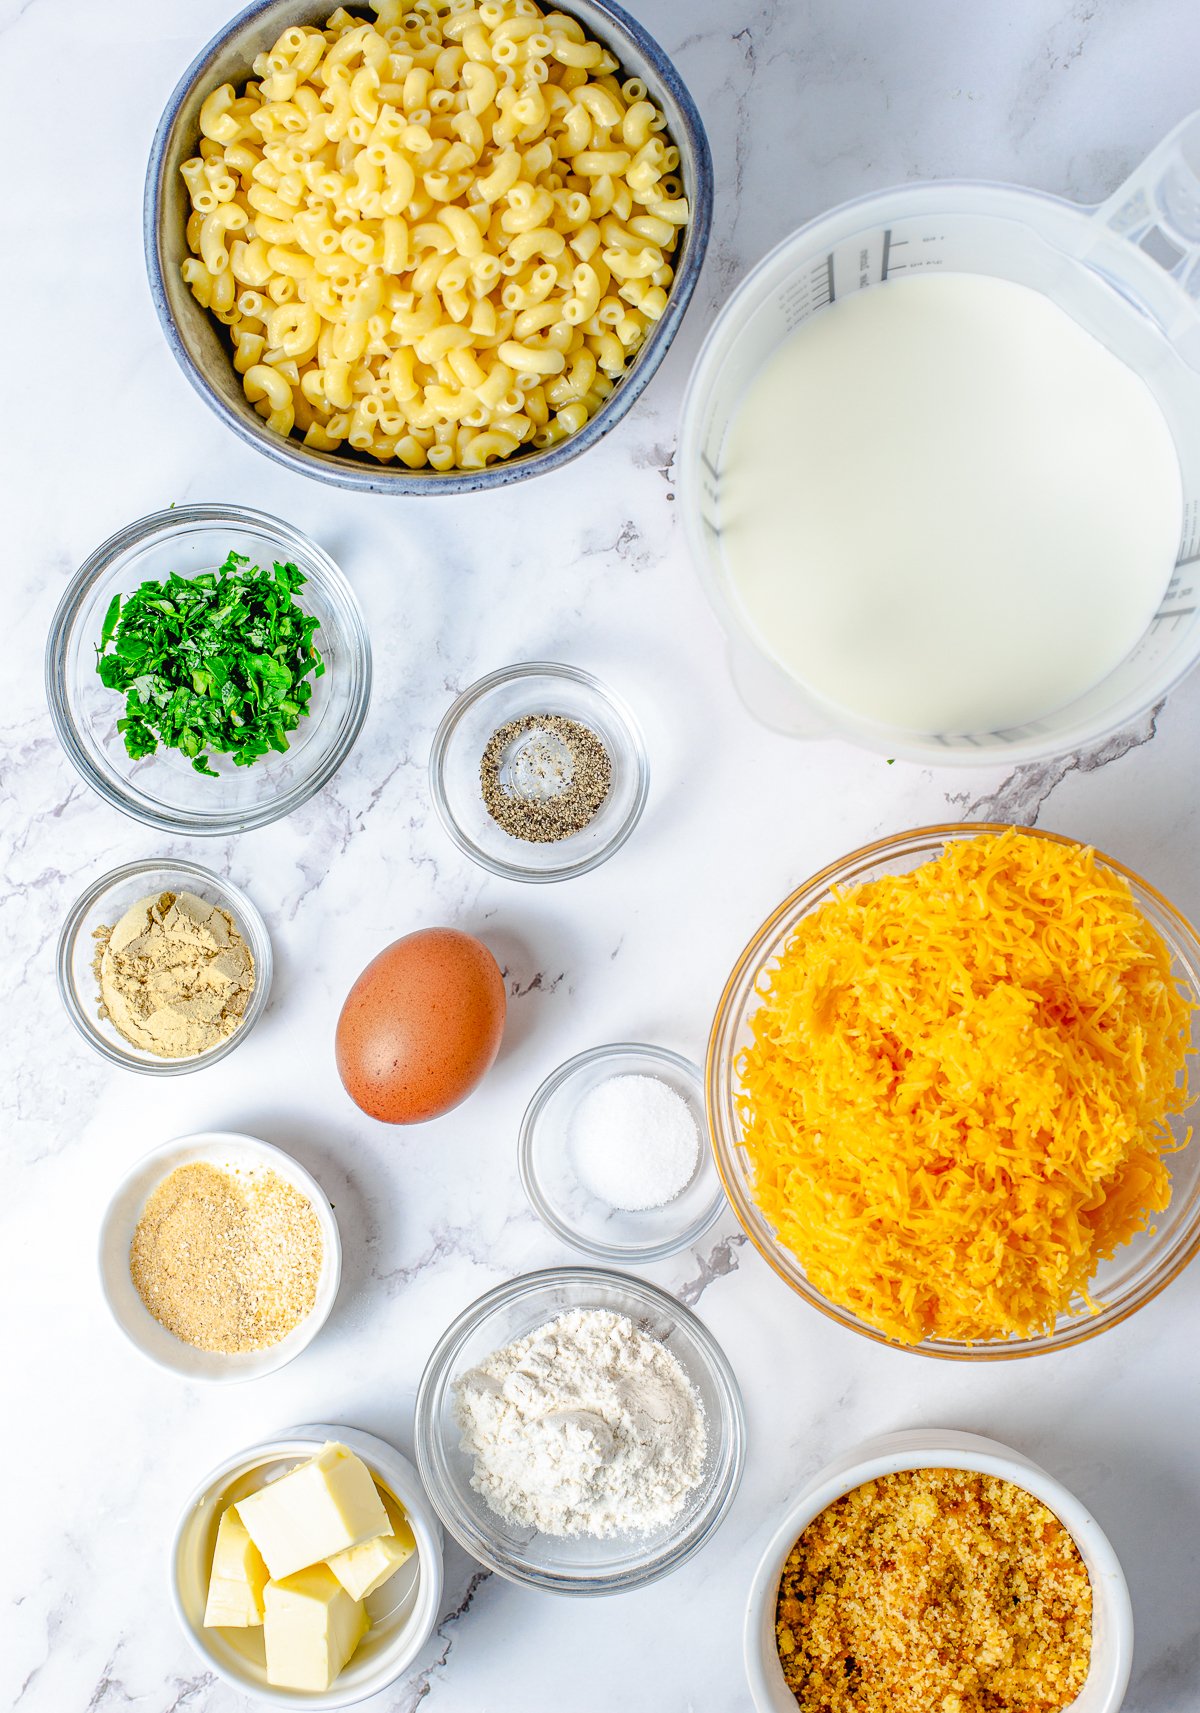 Ingredients needed to make Baked Macaroni and Cheese.